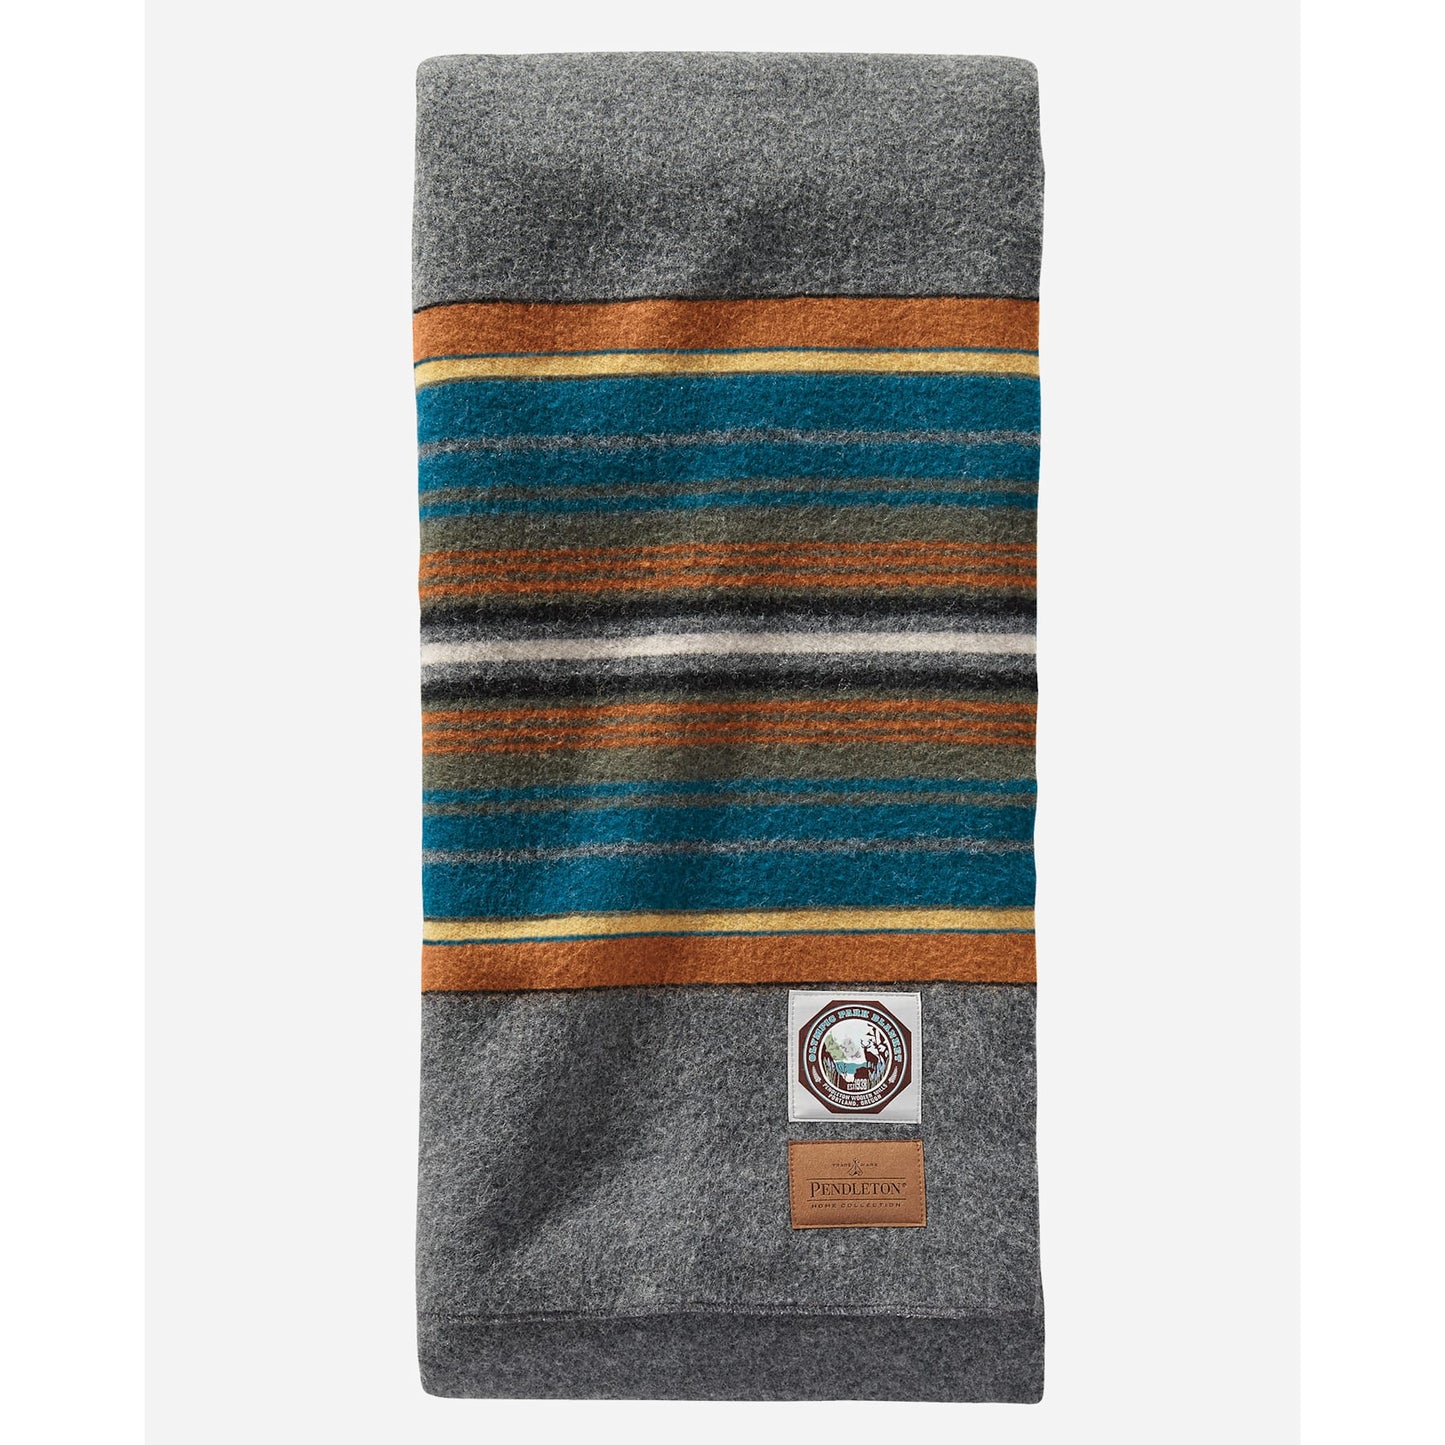 Pendleton wool camp blanket - gray with yellow and aqua blue stripes on edge